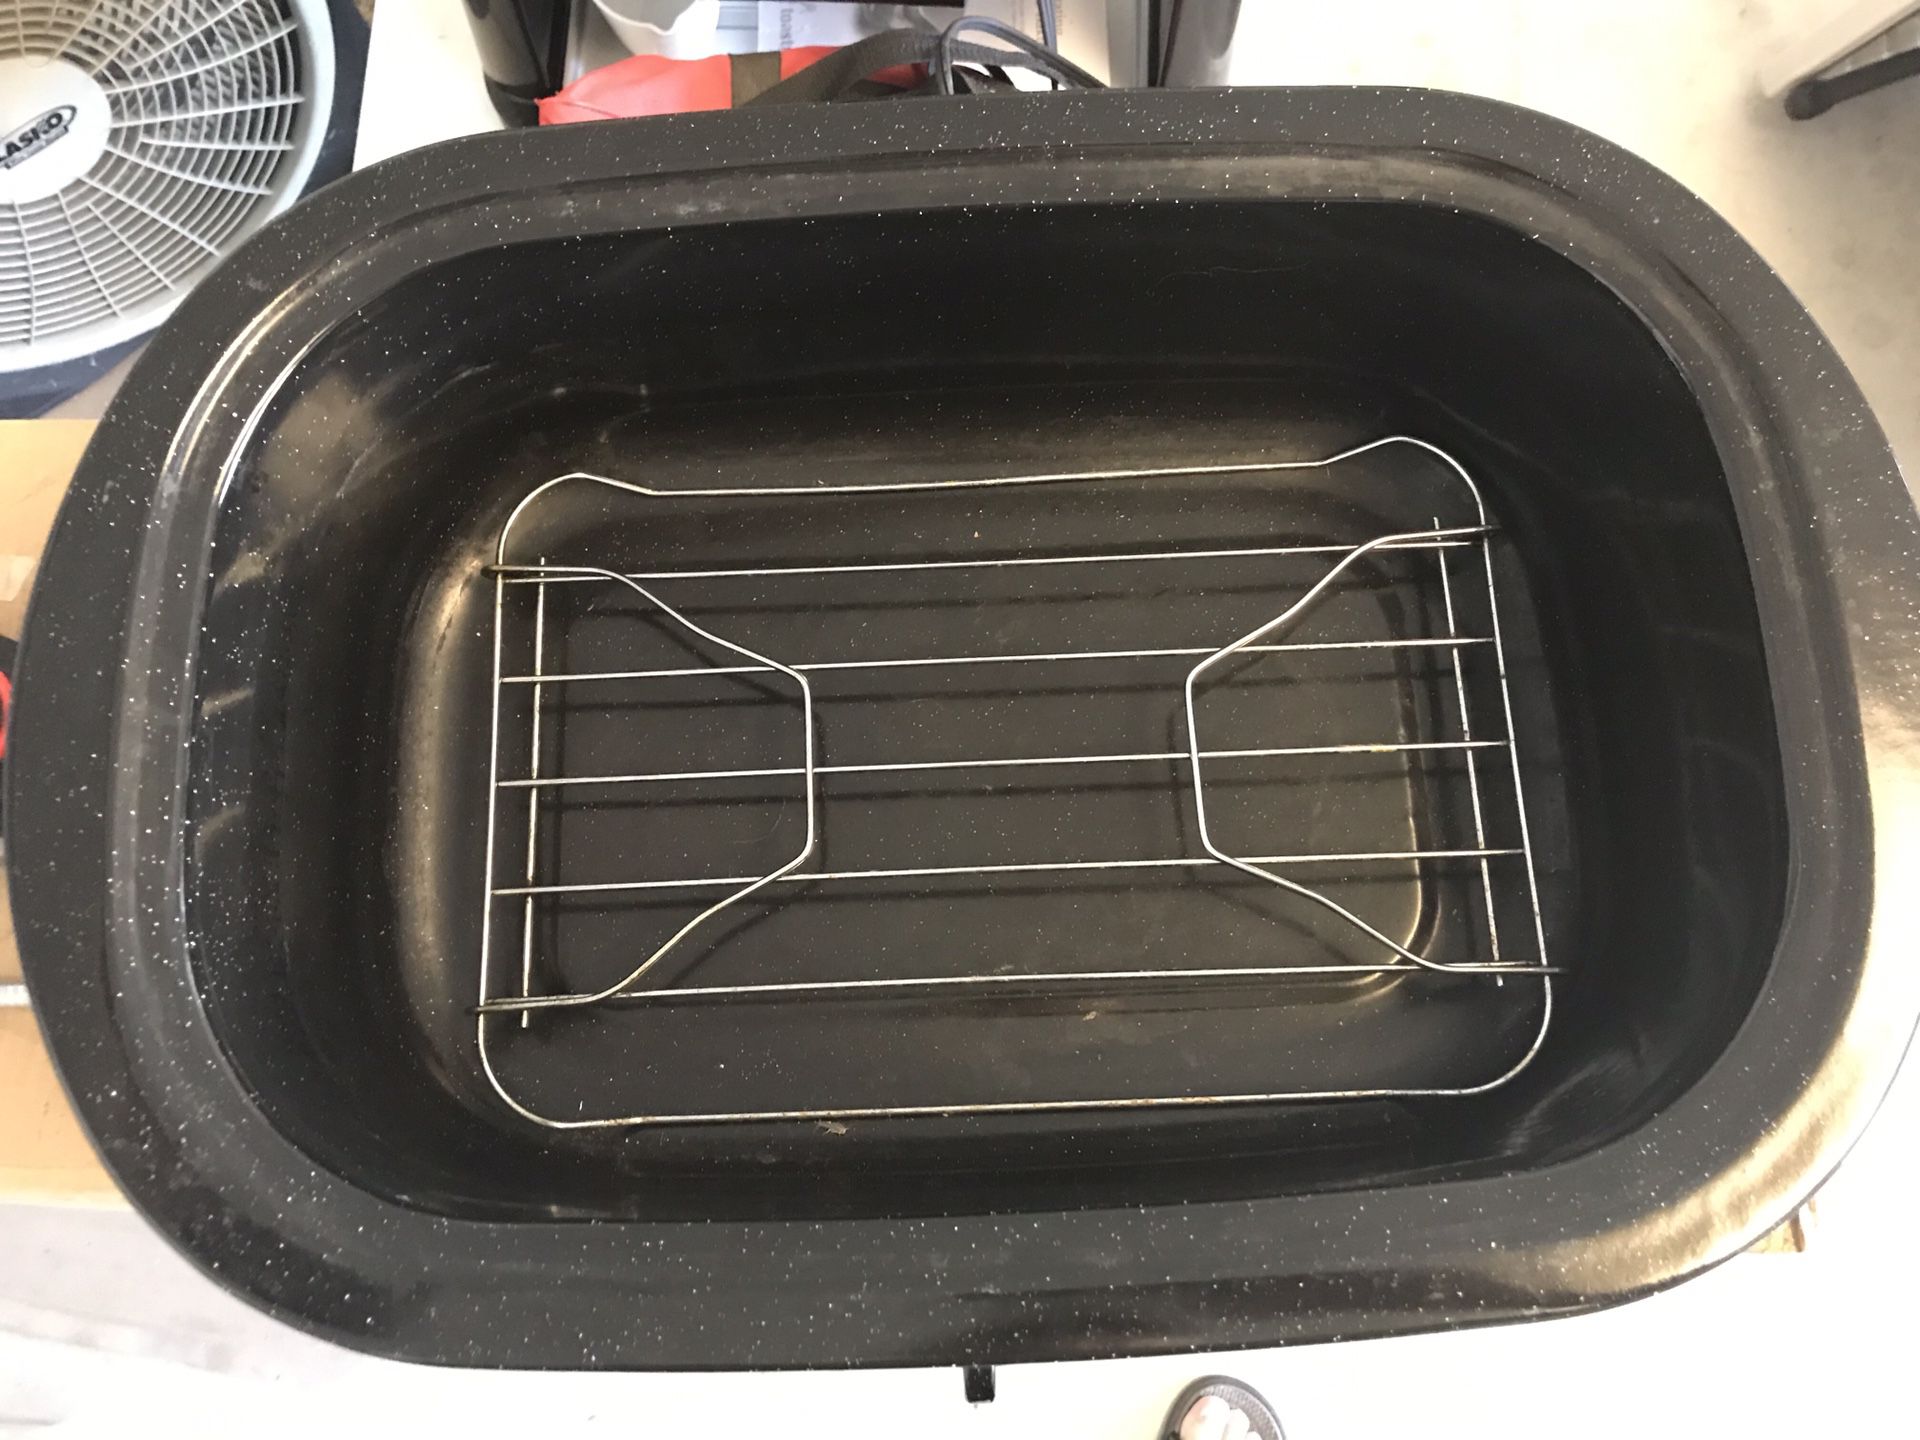 Nesco 12 quart convection air roaster for Sale in Long Beach, CA - OfferUp